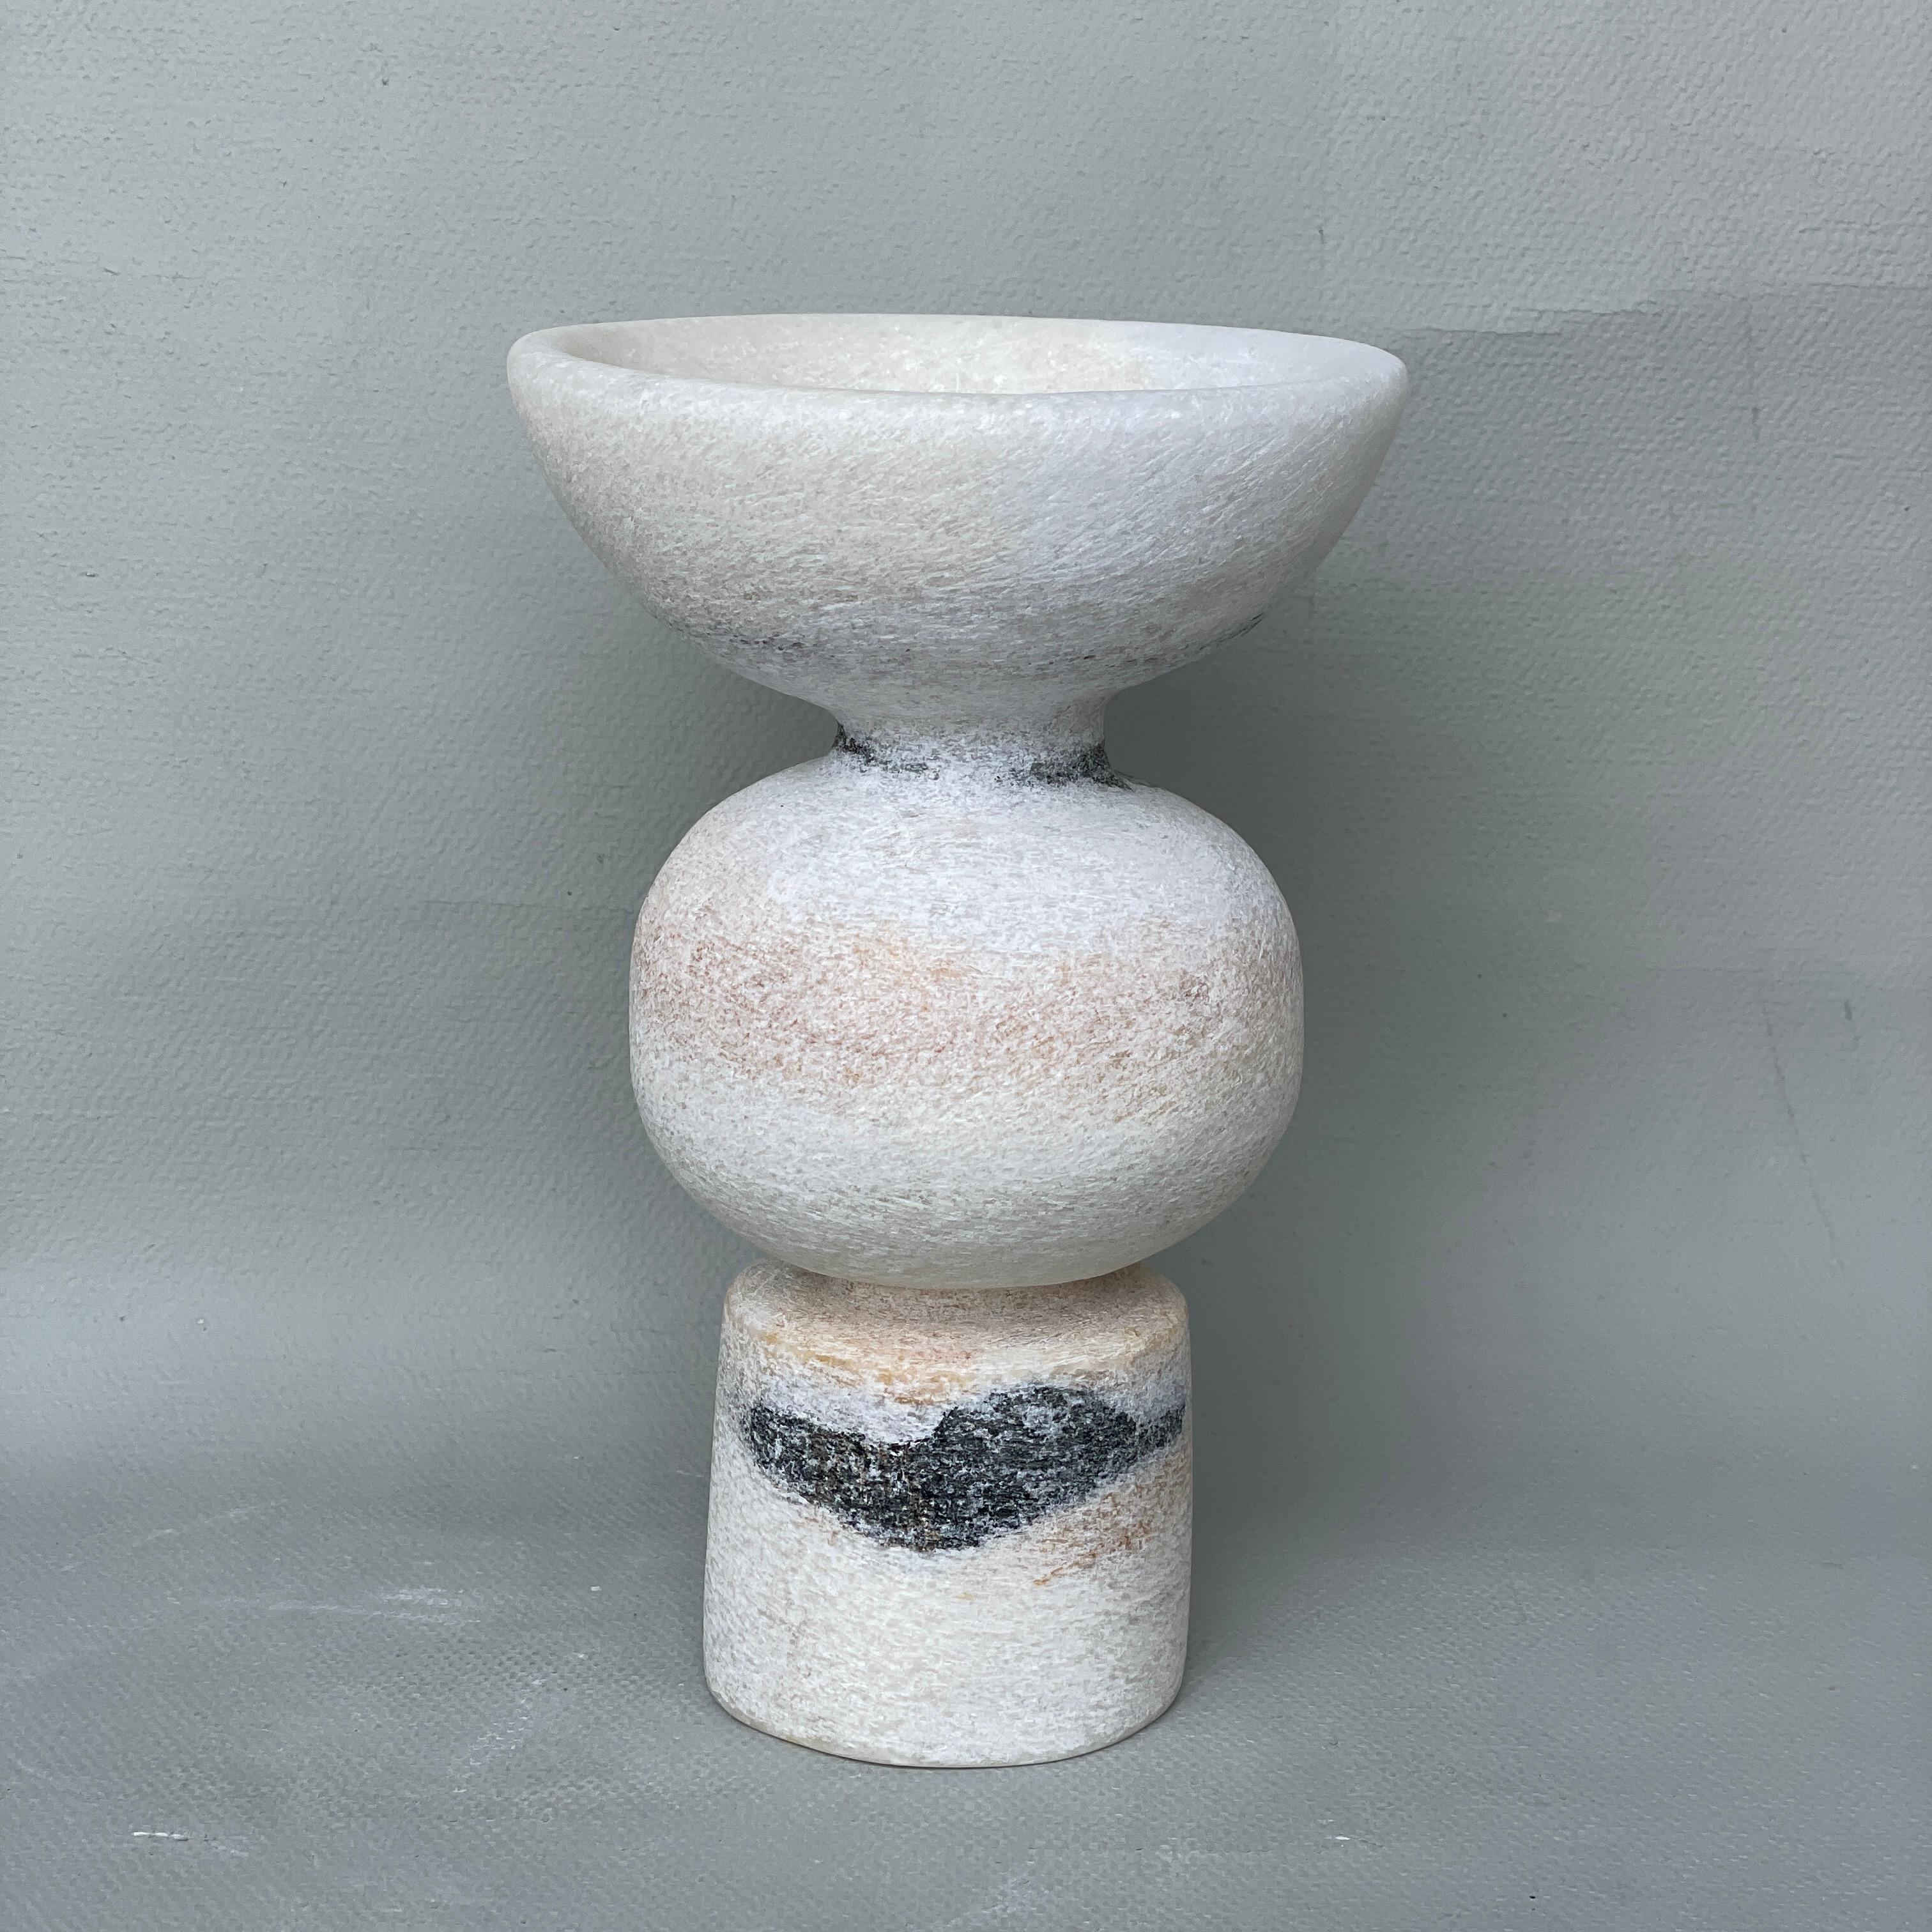 Unique Naxian Marble Vessel by Tom Von Kaenel
Unique piece.
Dimensions: Ø 12.5 x H 20 cm.
Materials: Naxian marble.

The surfaces of the objects are not sealed, they are not protected against acid. The lines of the handcraft are visible it